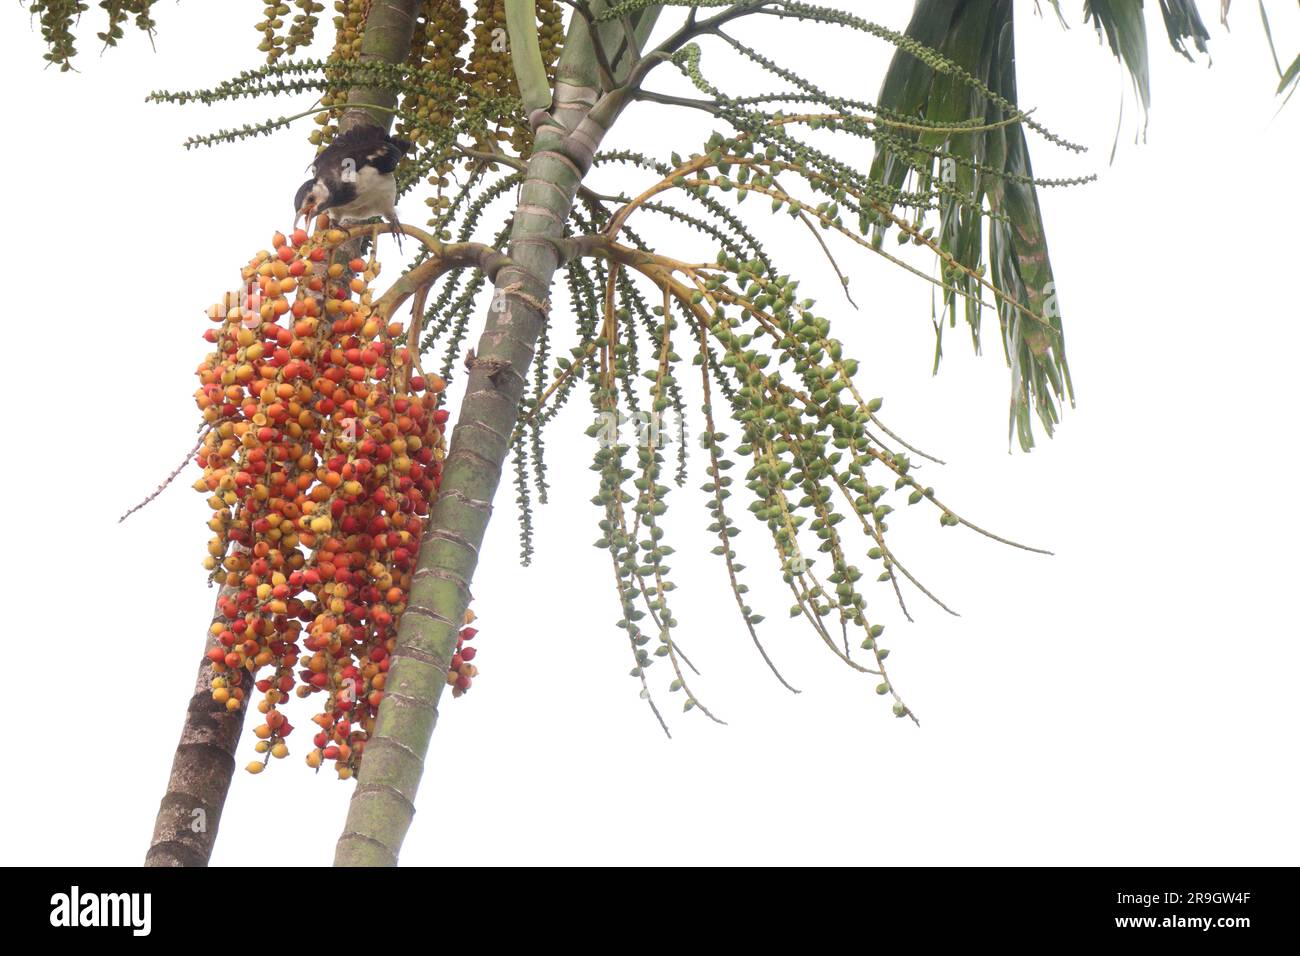 Red Areca Nut Palm on tree for nice nature Stock Photo